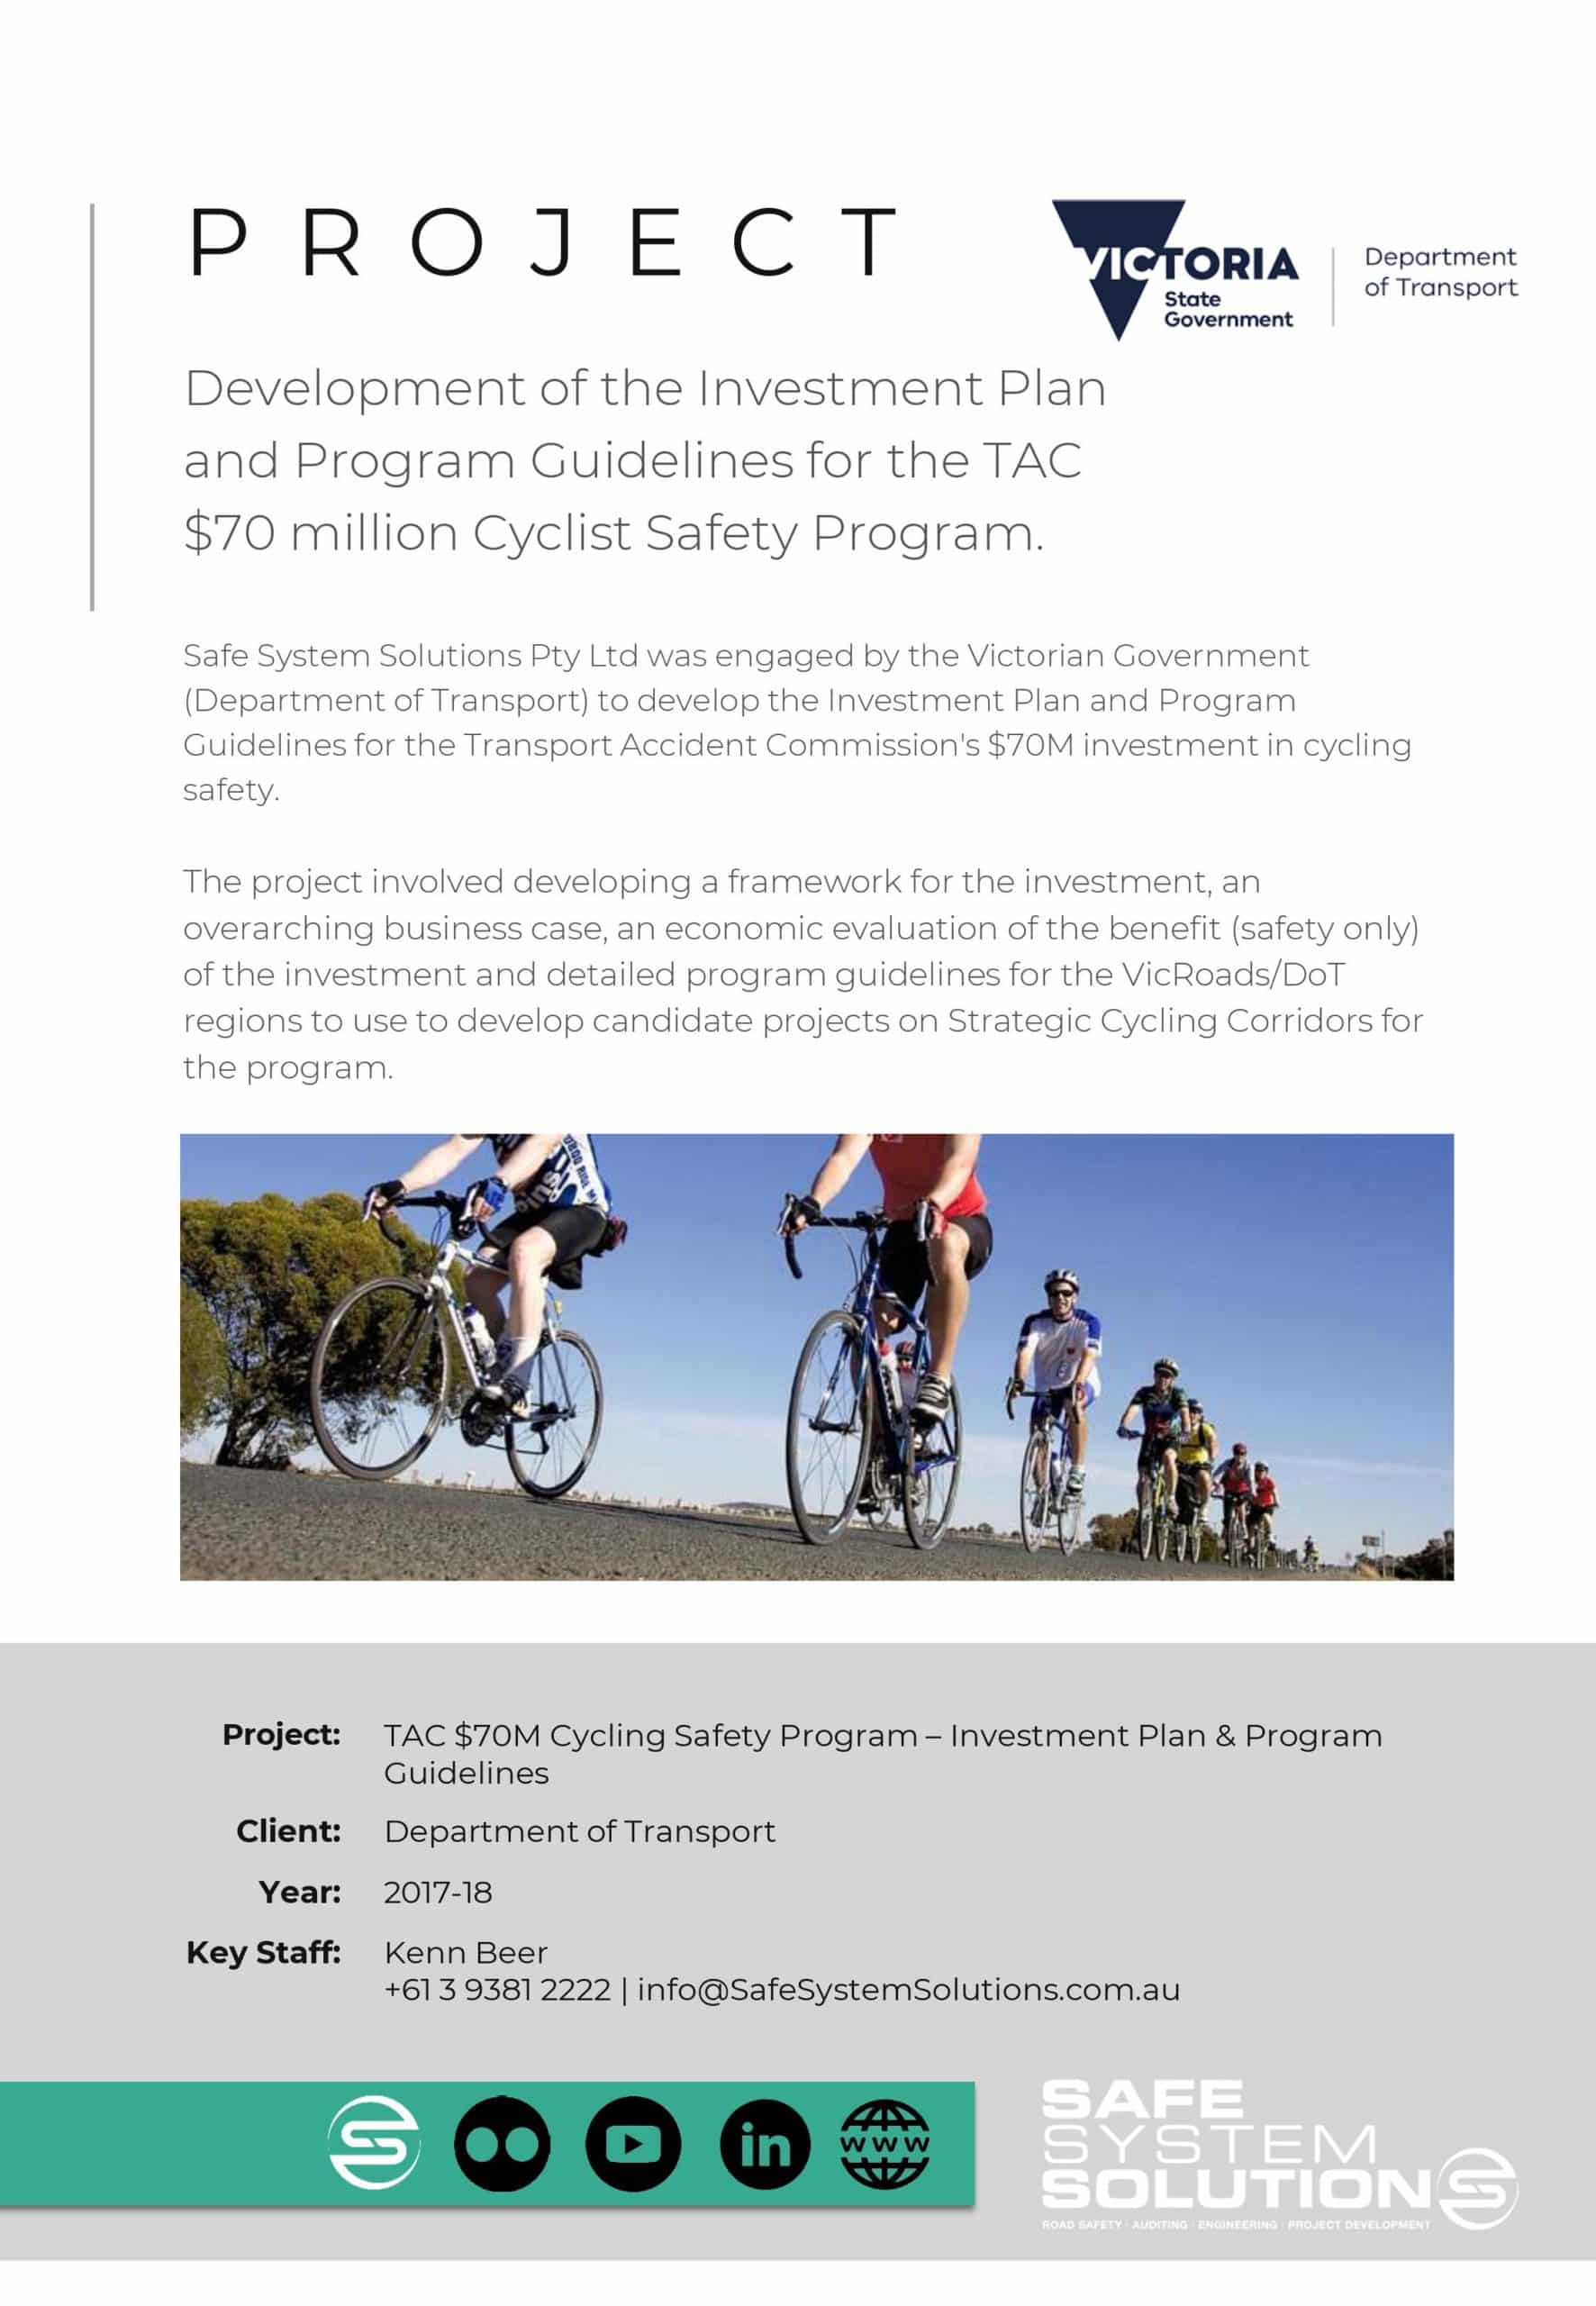 Development of the Investment Plan and Program Guidelines for the TAC $70 million Cyclist Safety Program